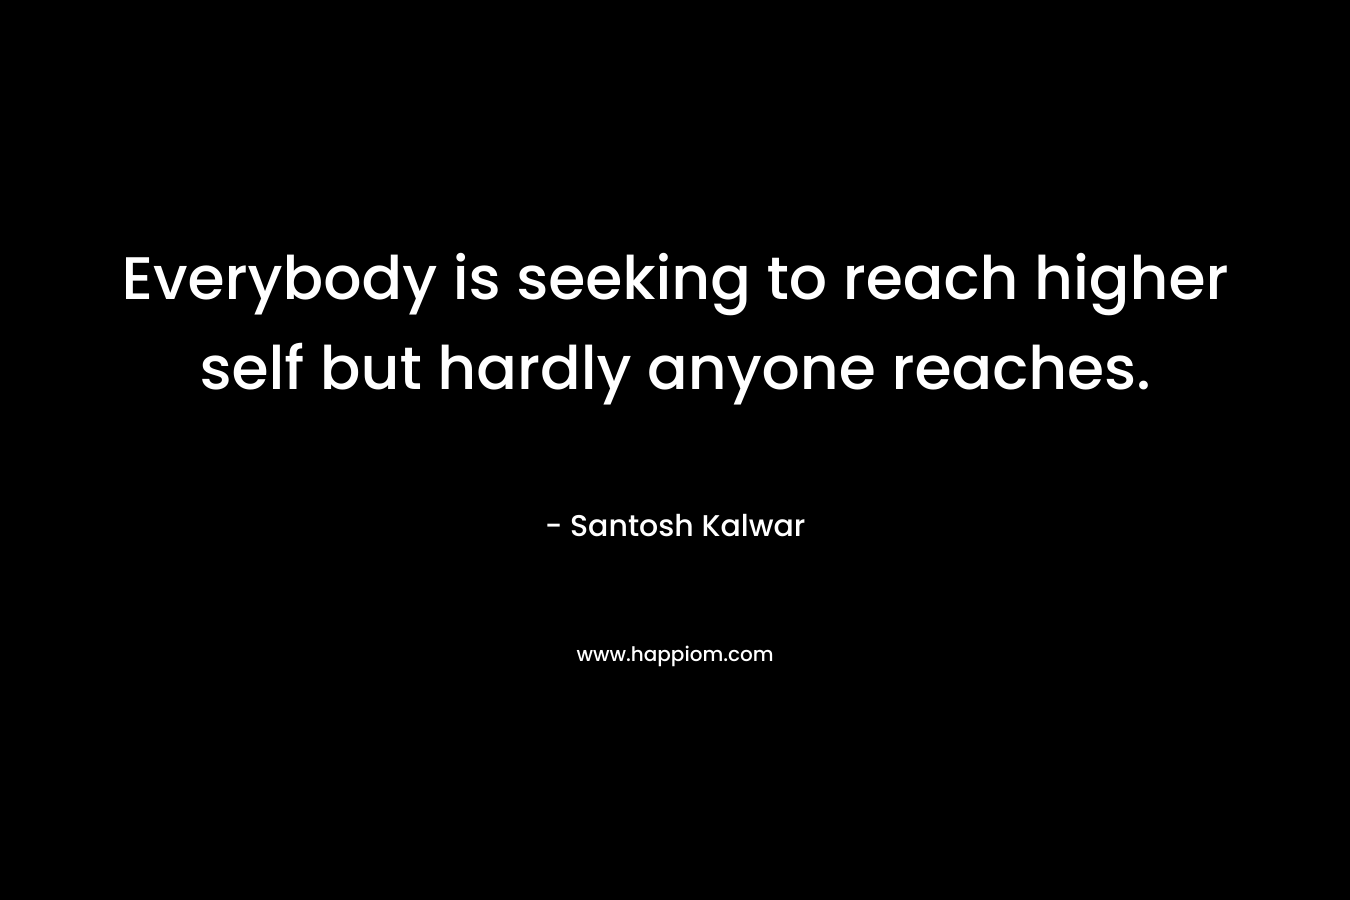 Everybody is seeking to reach higher self but hardly anyone reaches.